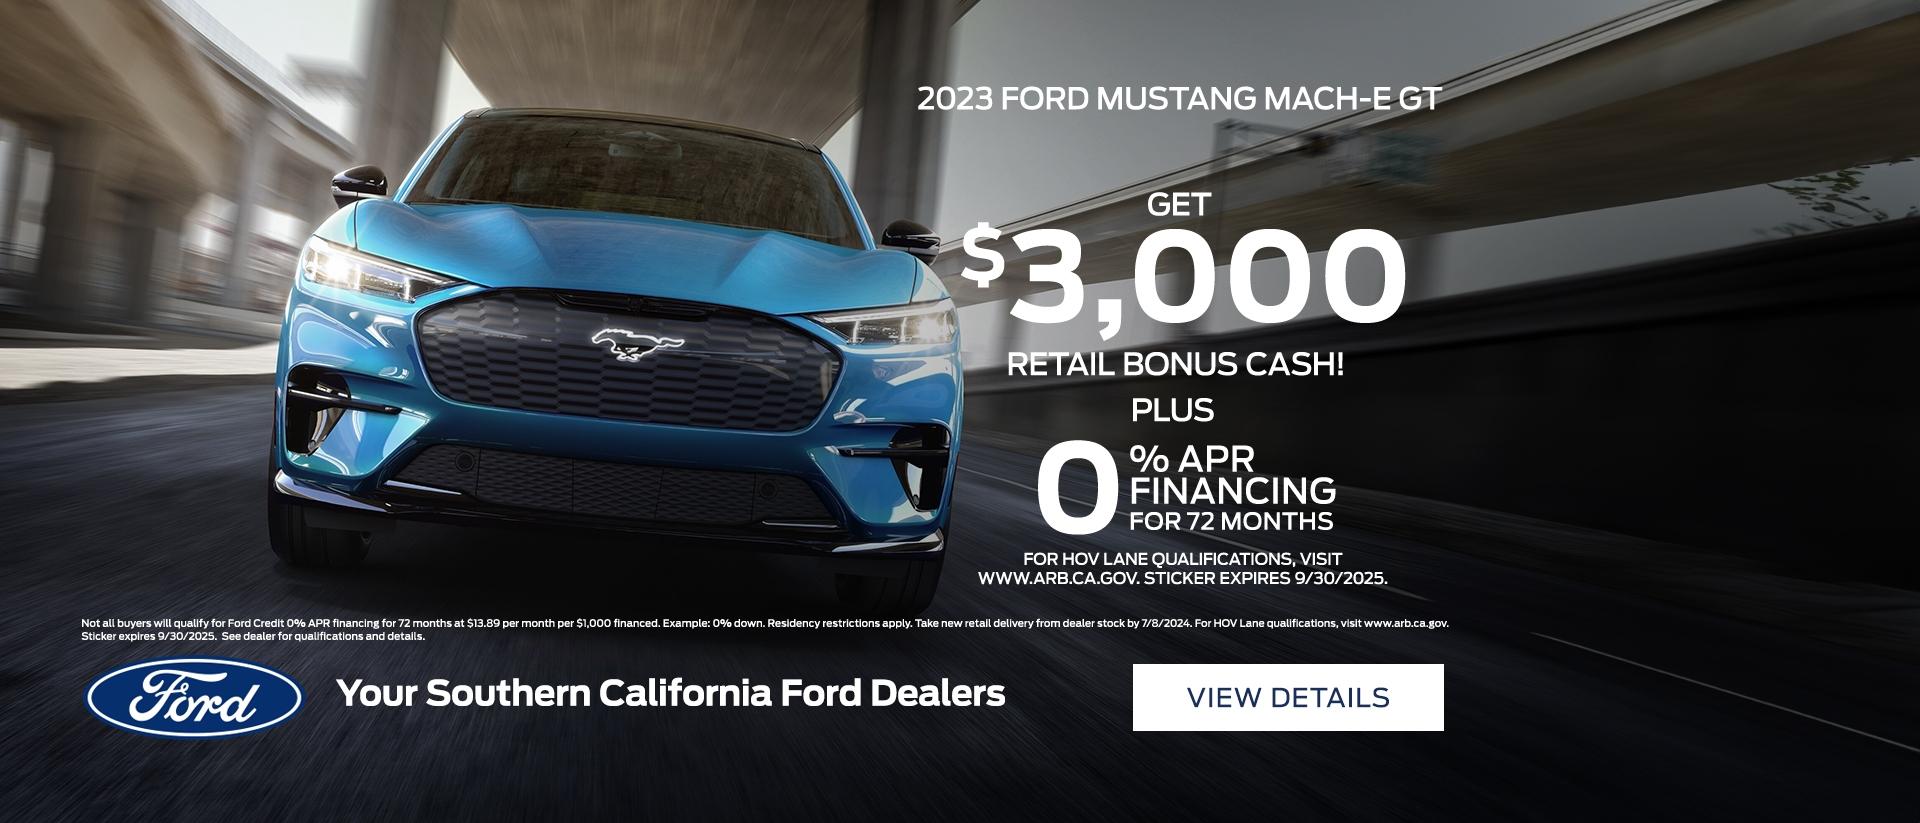 2023 Ford Mustang Mach-E Purchase Offer | Southern California Ford Dealers